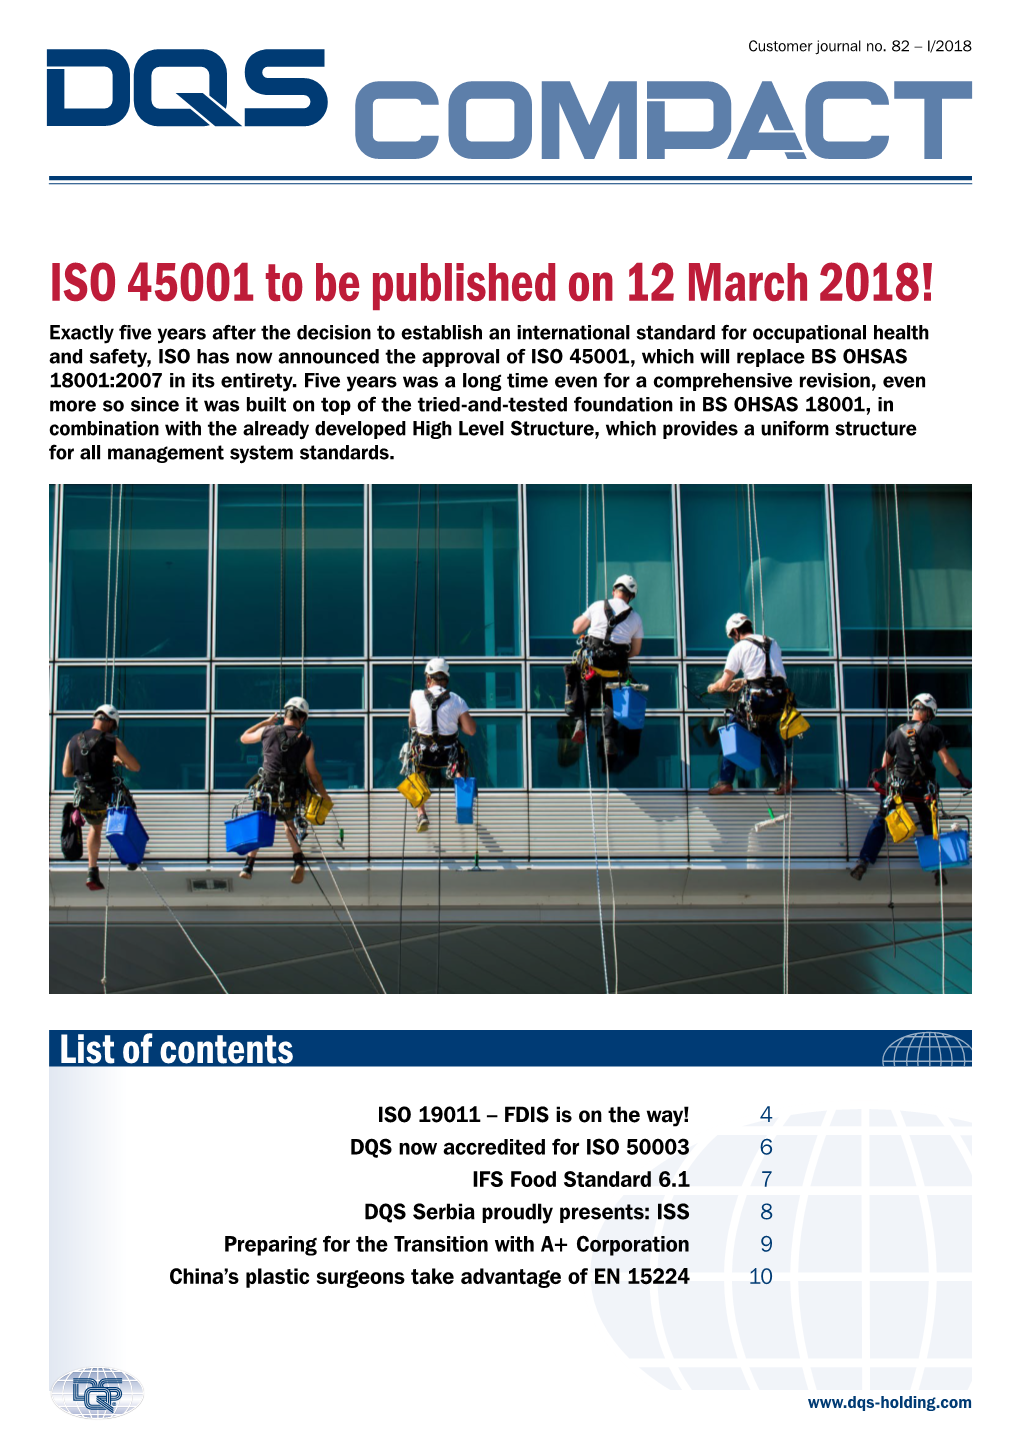 ISO 45001 to Be Published on 12 March 2018!